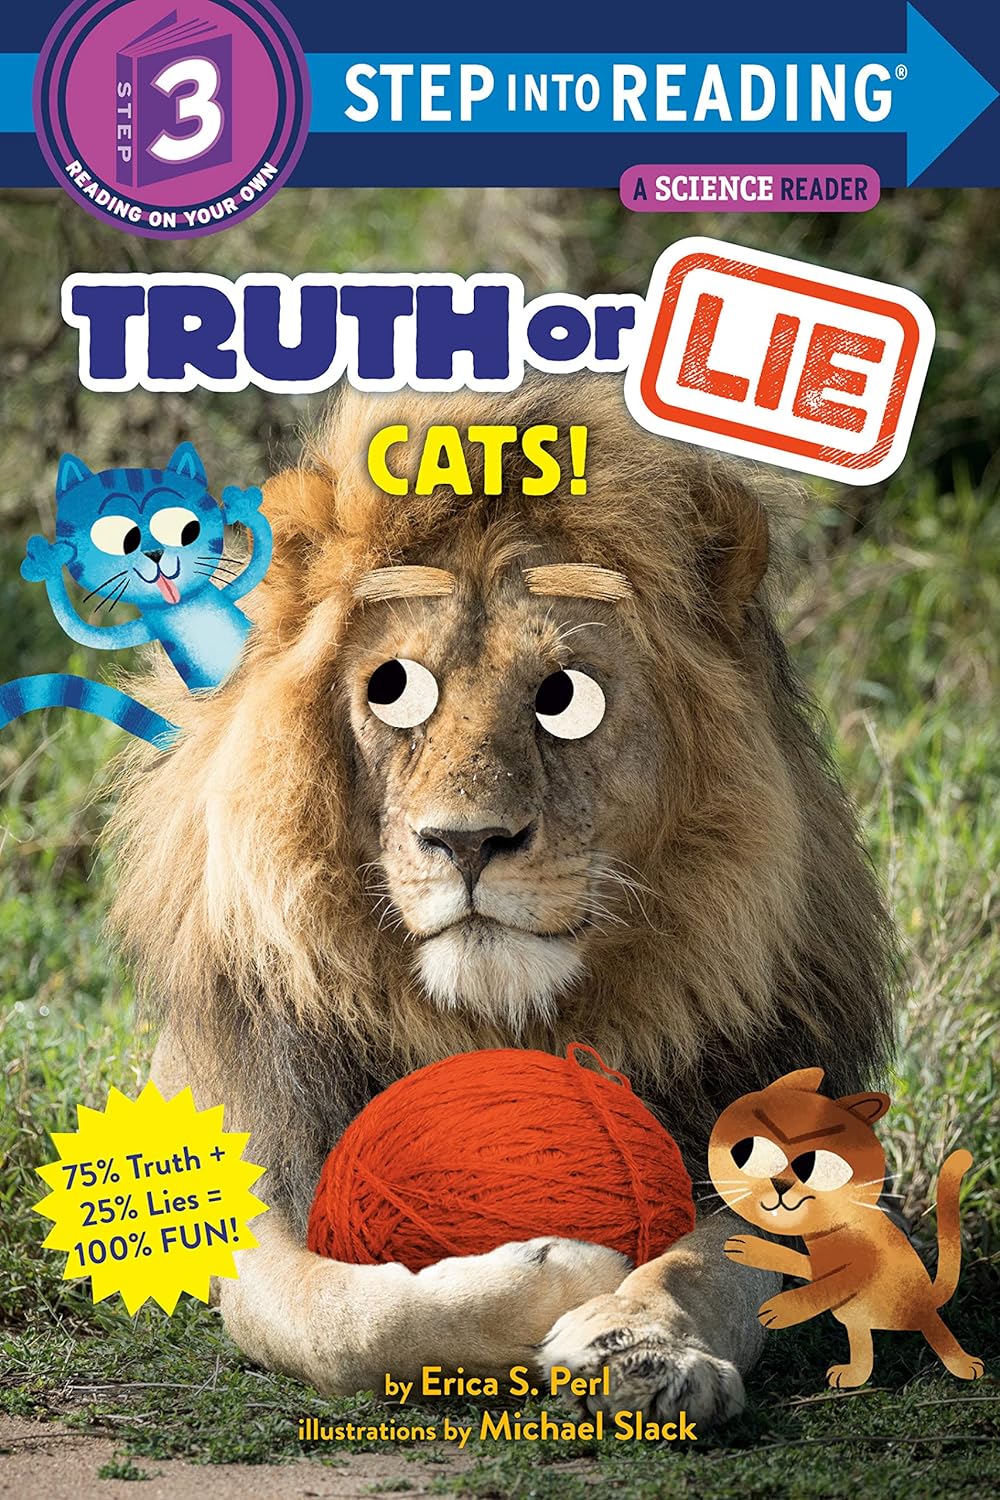 SIR(Step3):Truth or Lie:Cats!